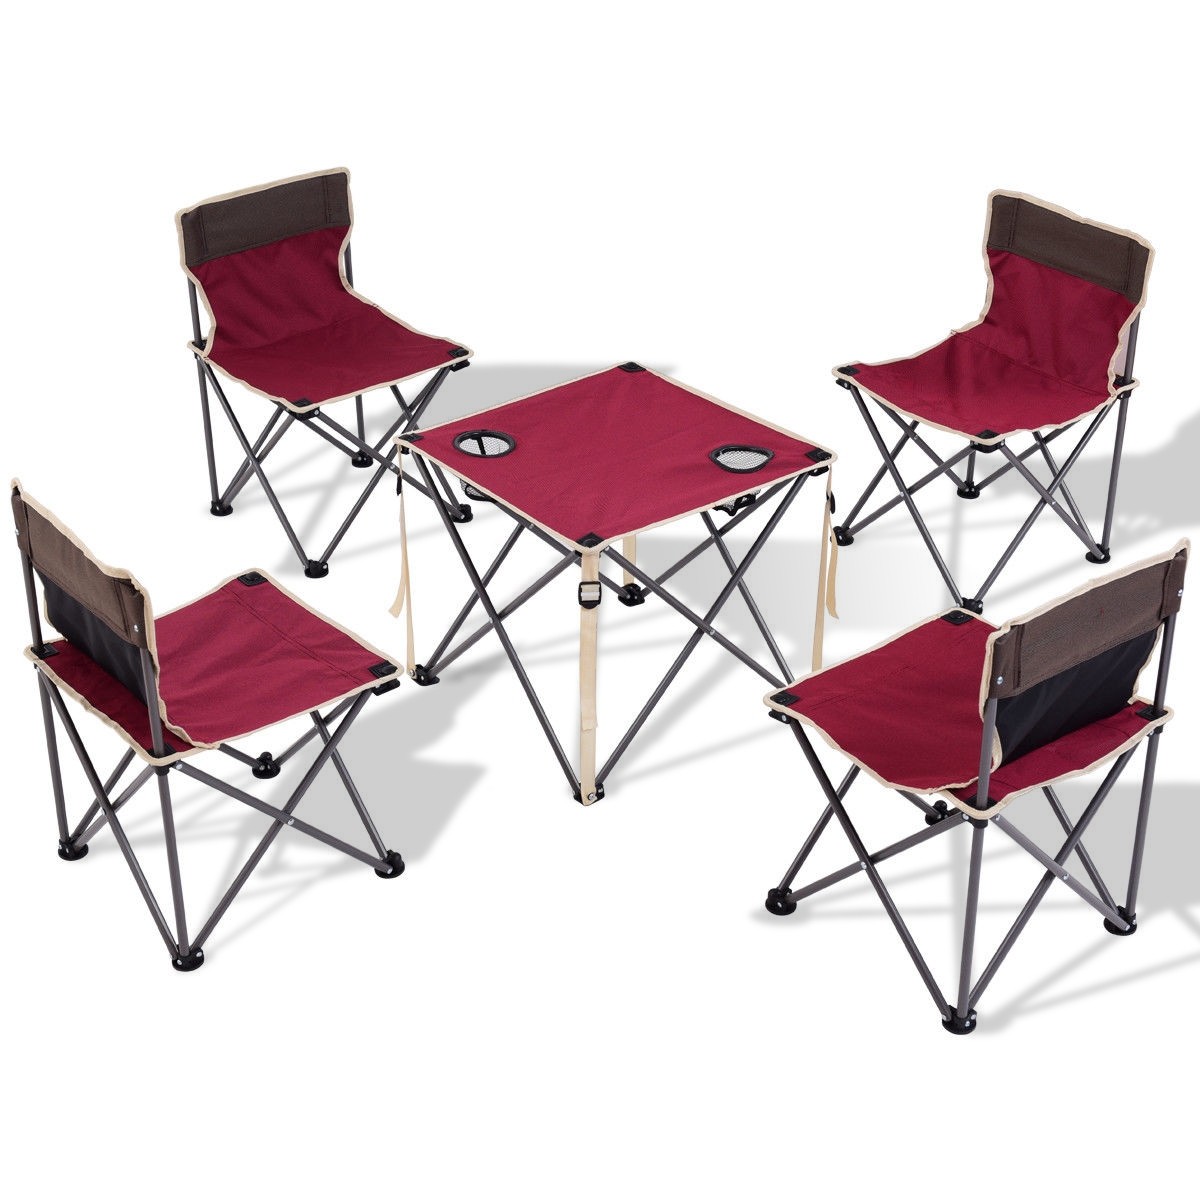 Outdoor Camp Portable Folding Table Chairs Set W / Carrying Bag